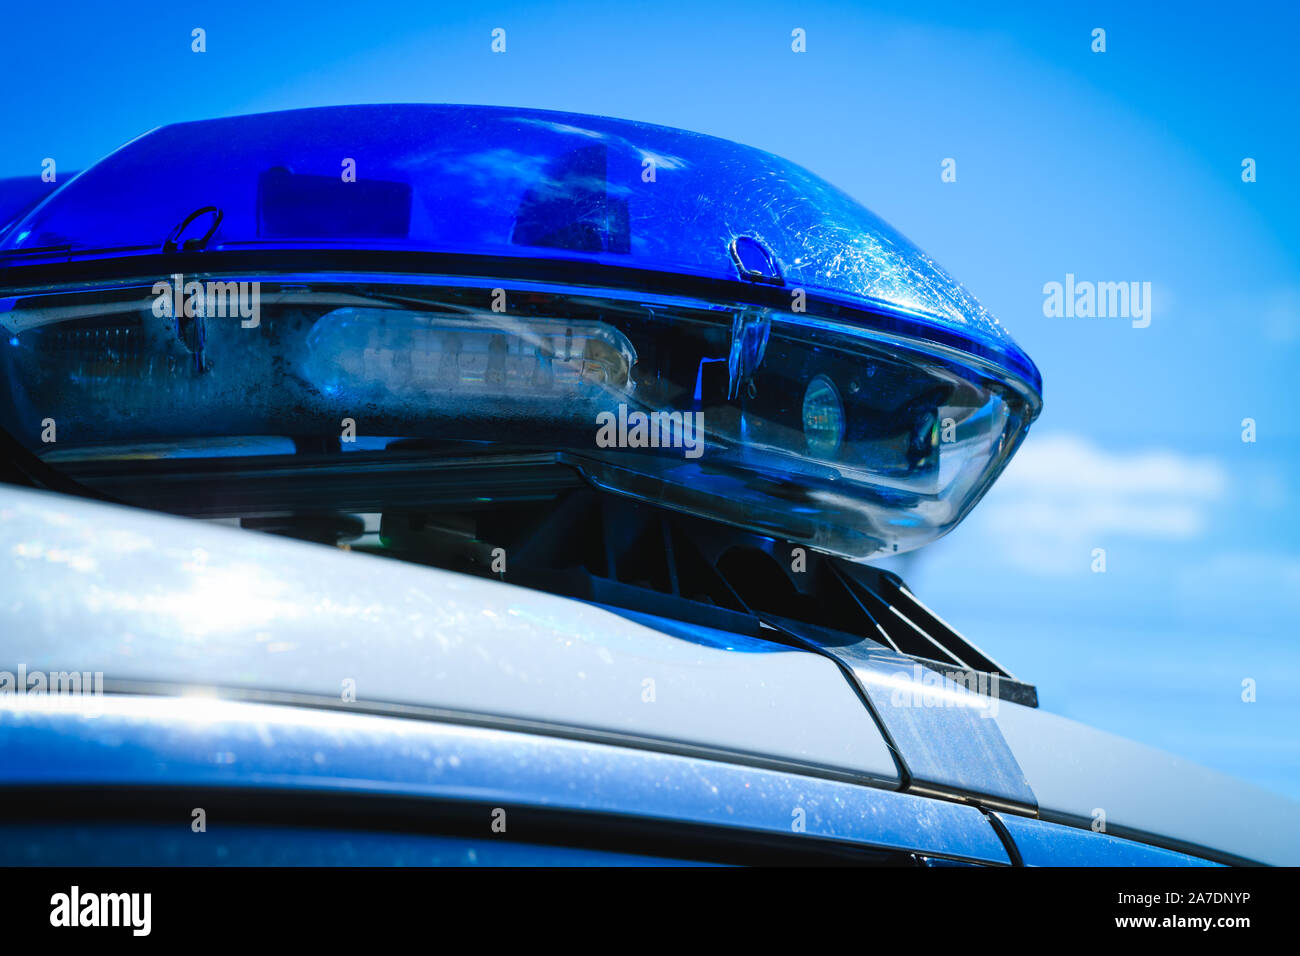 Blue flash lights on top of vehicle for urgent situation. Emergency or police car with the siren lights off in full activity. Canadian or American pol Stock Photo